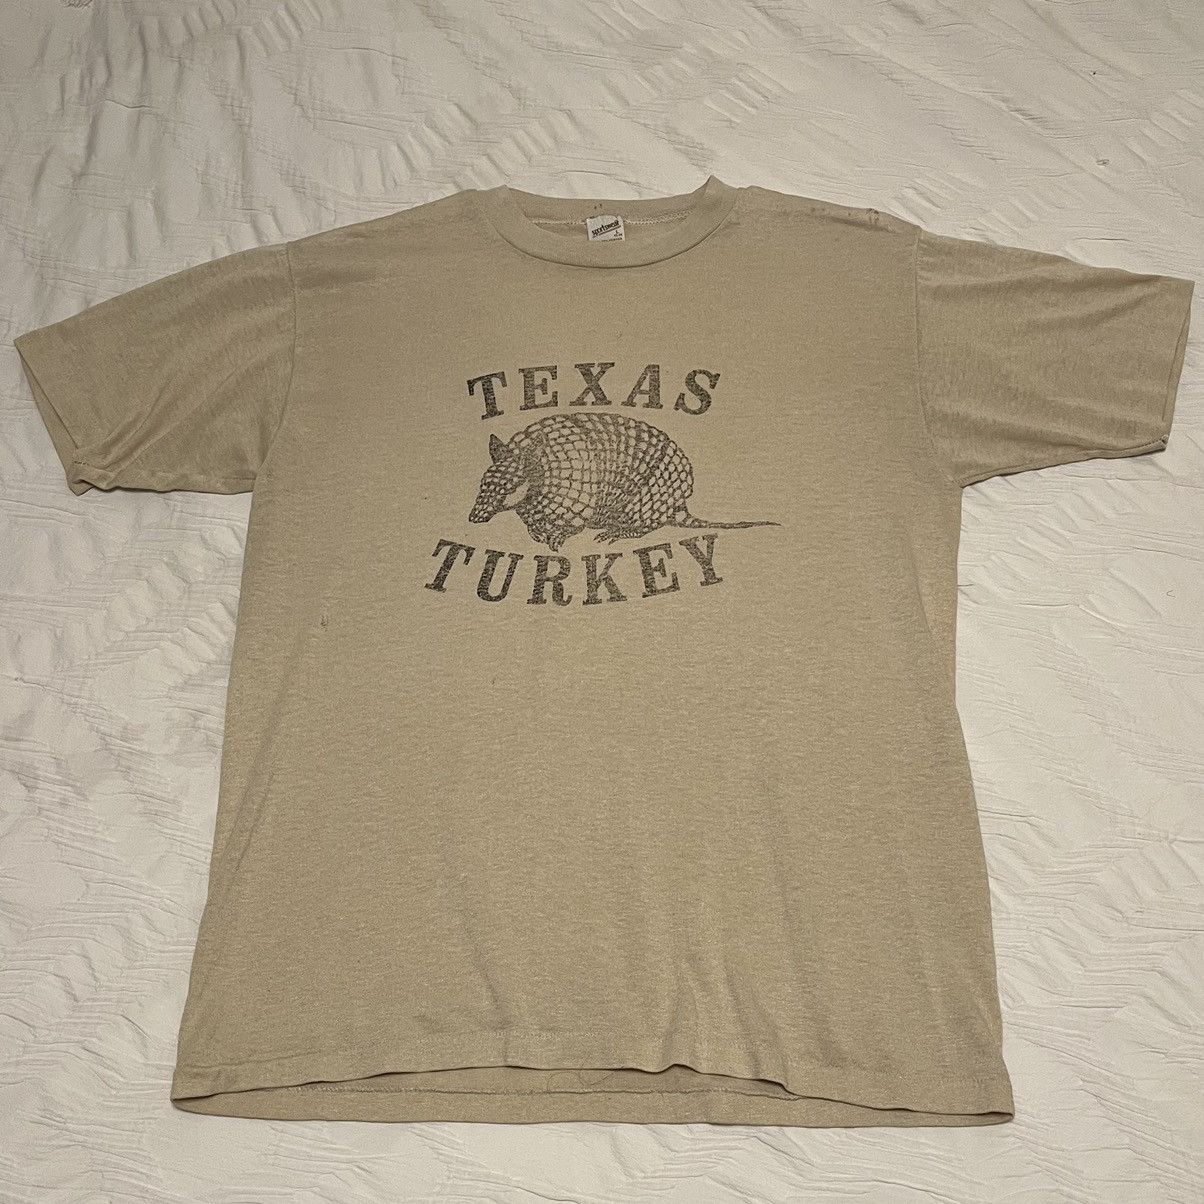 Vintage Vintage Texas Turkey Made in USA Size US M / EU 48-50 / 2 - 1 Preview